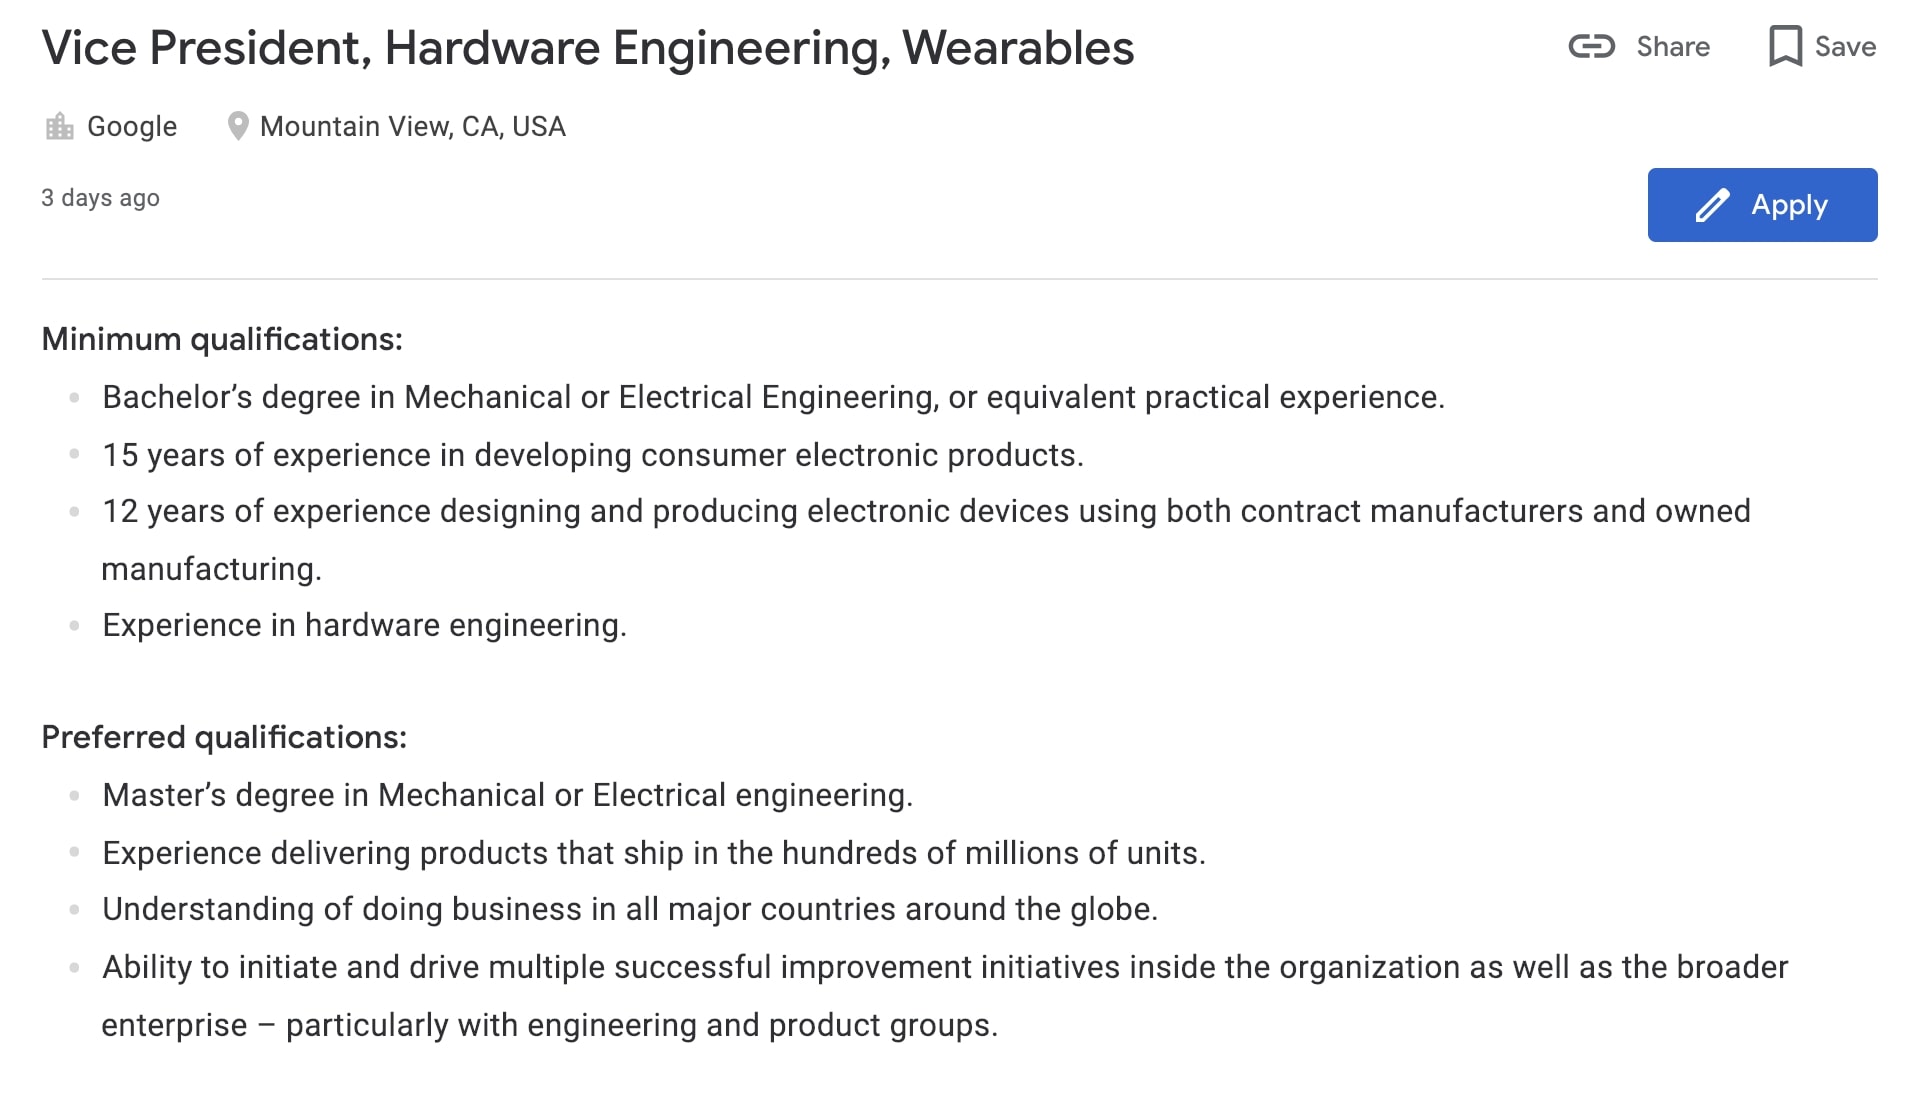 Google Careers Listing for Vice President of Hardware Engineering, Wearables 